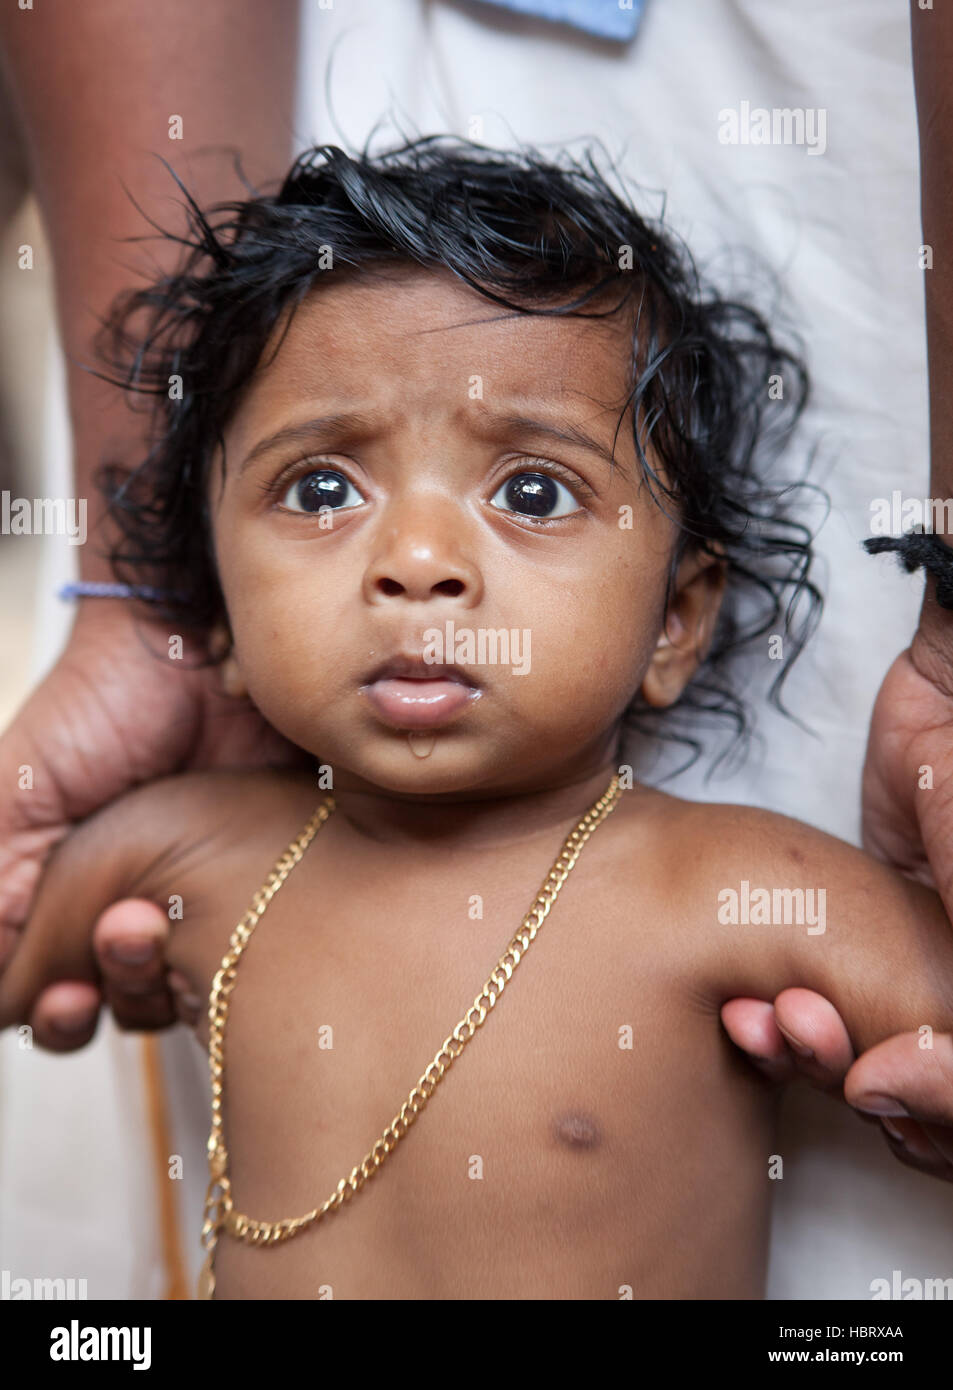 Portrait of anxious looking baby in Kerala,India Stock Photo